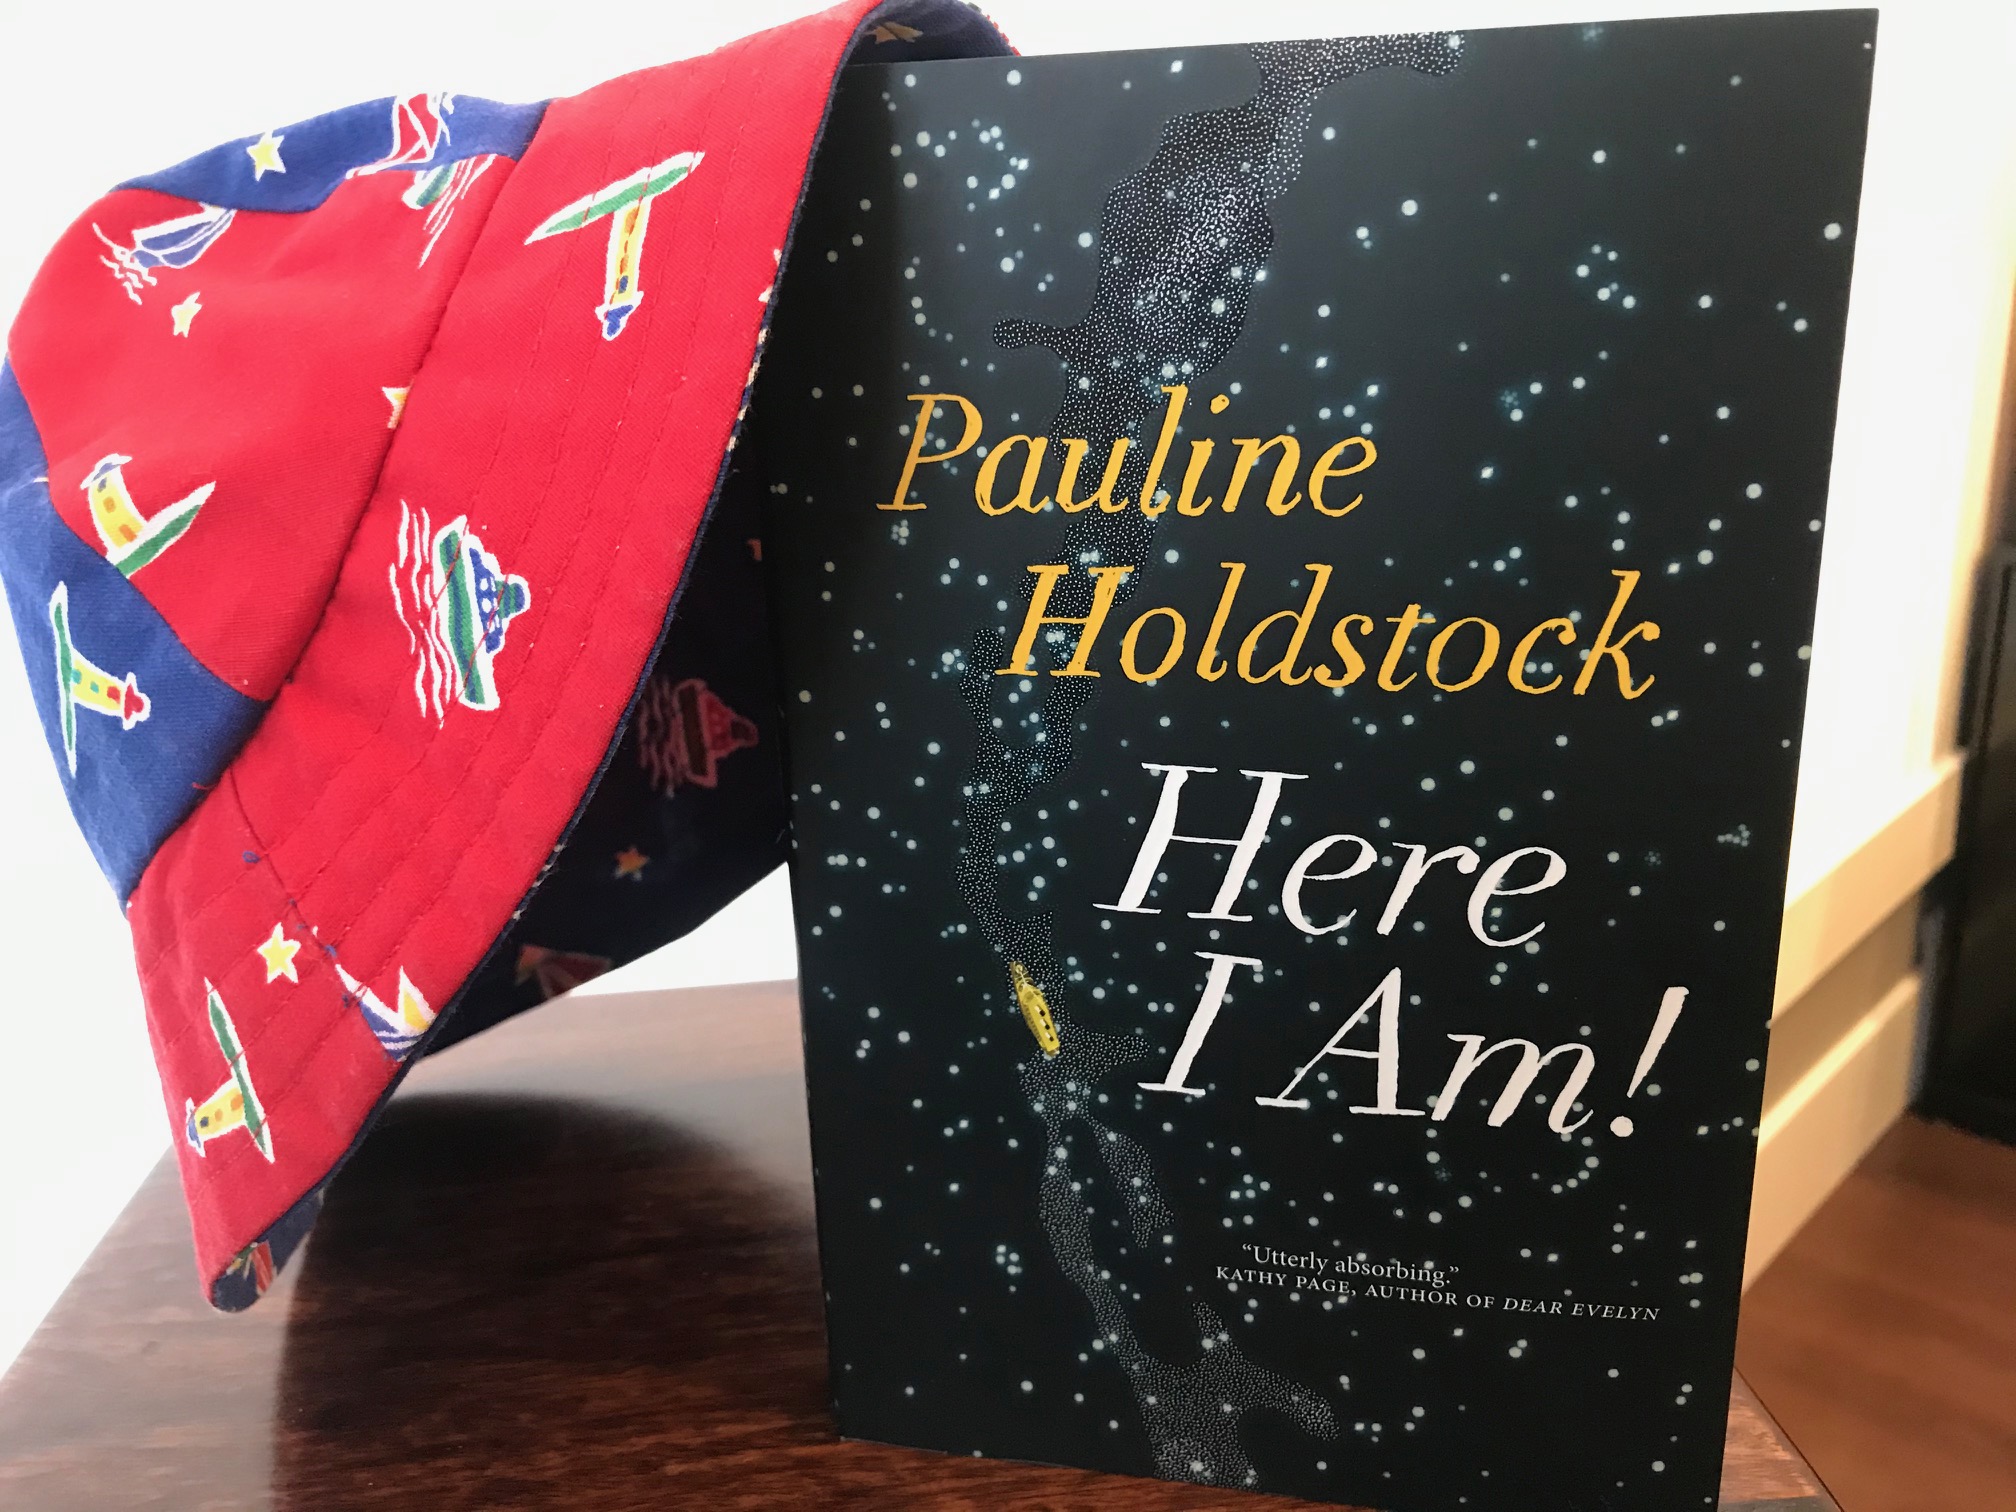 Here I Am! by Pauline Holdstock book with a young boy's blue and red hat sitting against it